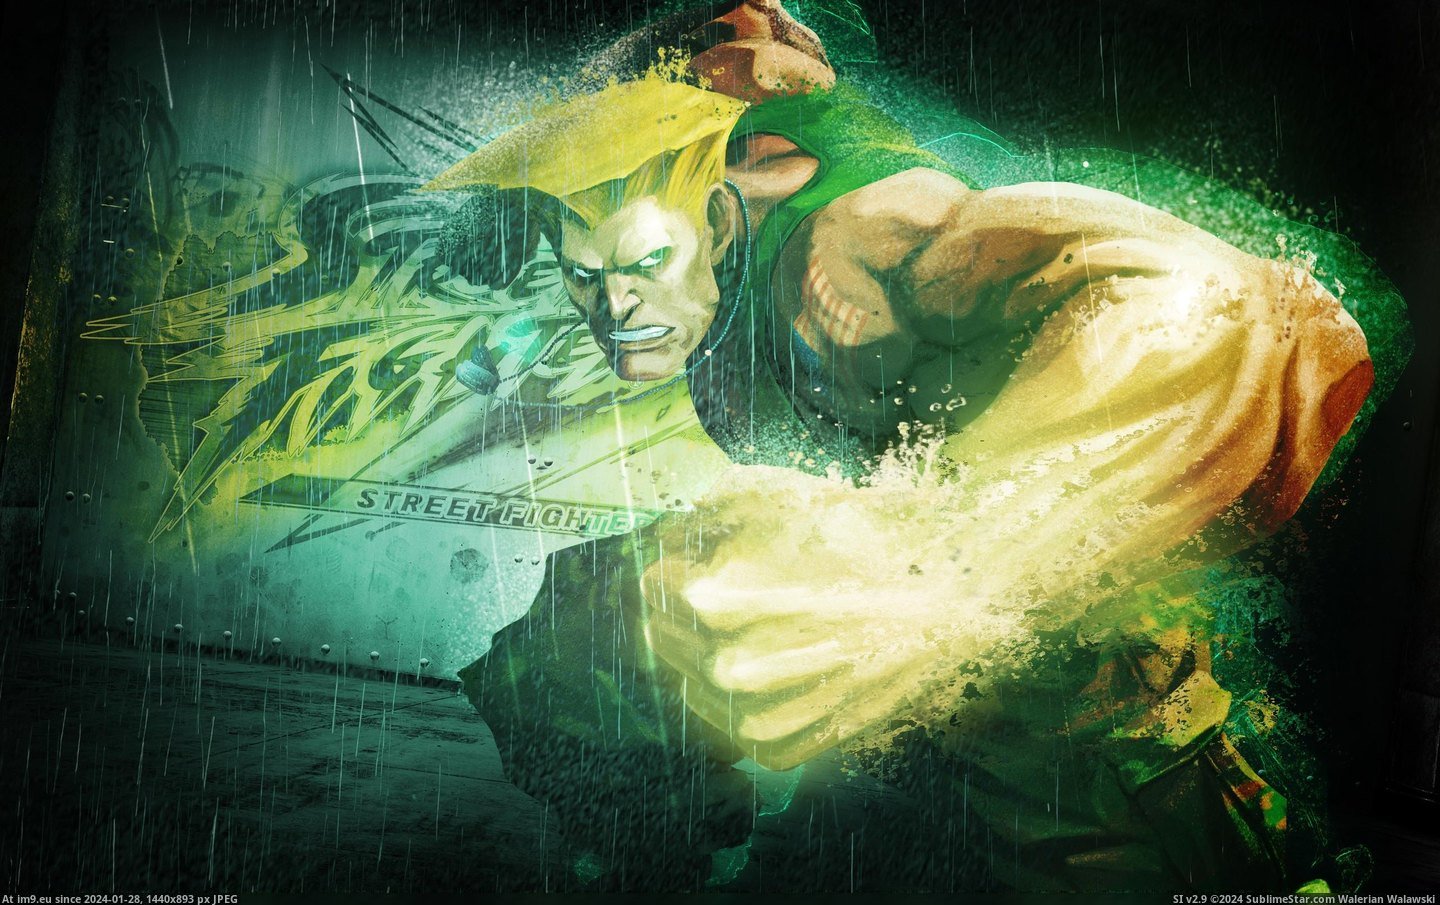 #Wallpaper #Wide #Guile #Street #Fighter Guile In Street Fighter Wide HD Wallpaper Pic. (Bild von album Unique HD Wallpapers))